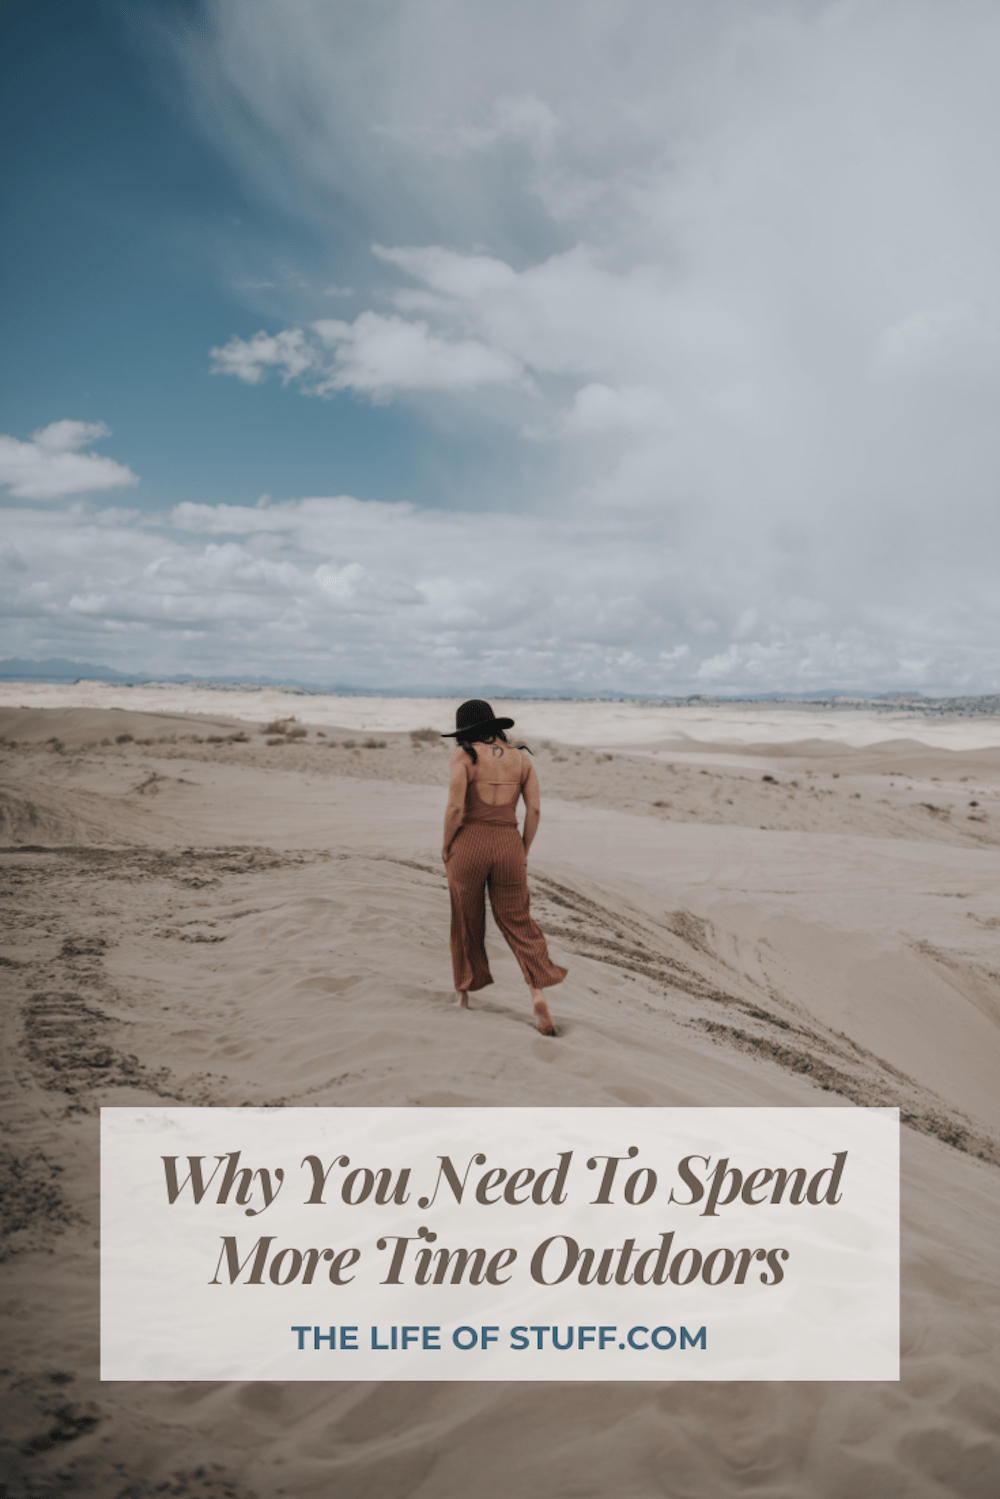 Why You Need To Spend More Time Outdoors - The Life of Stuff